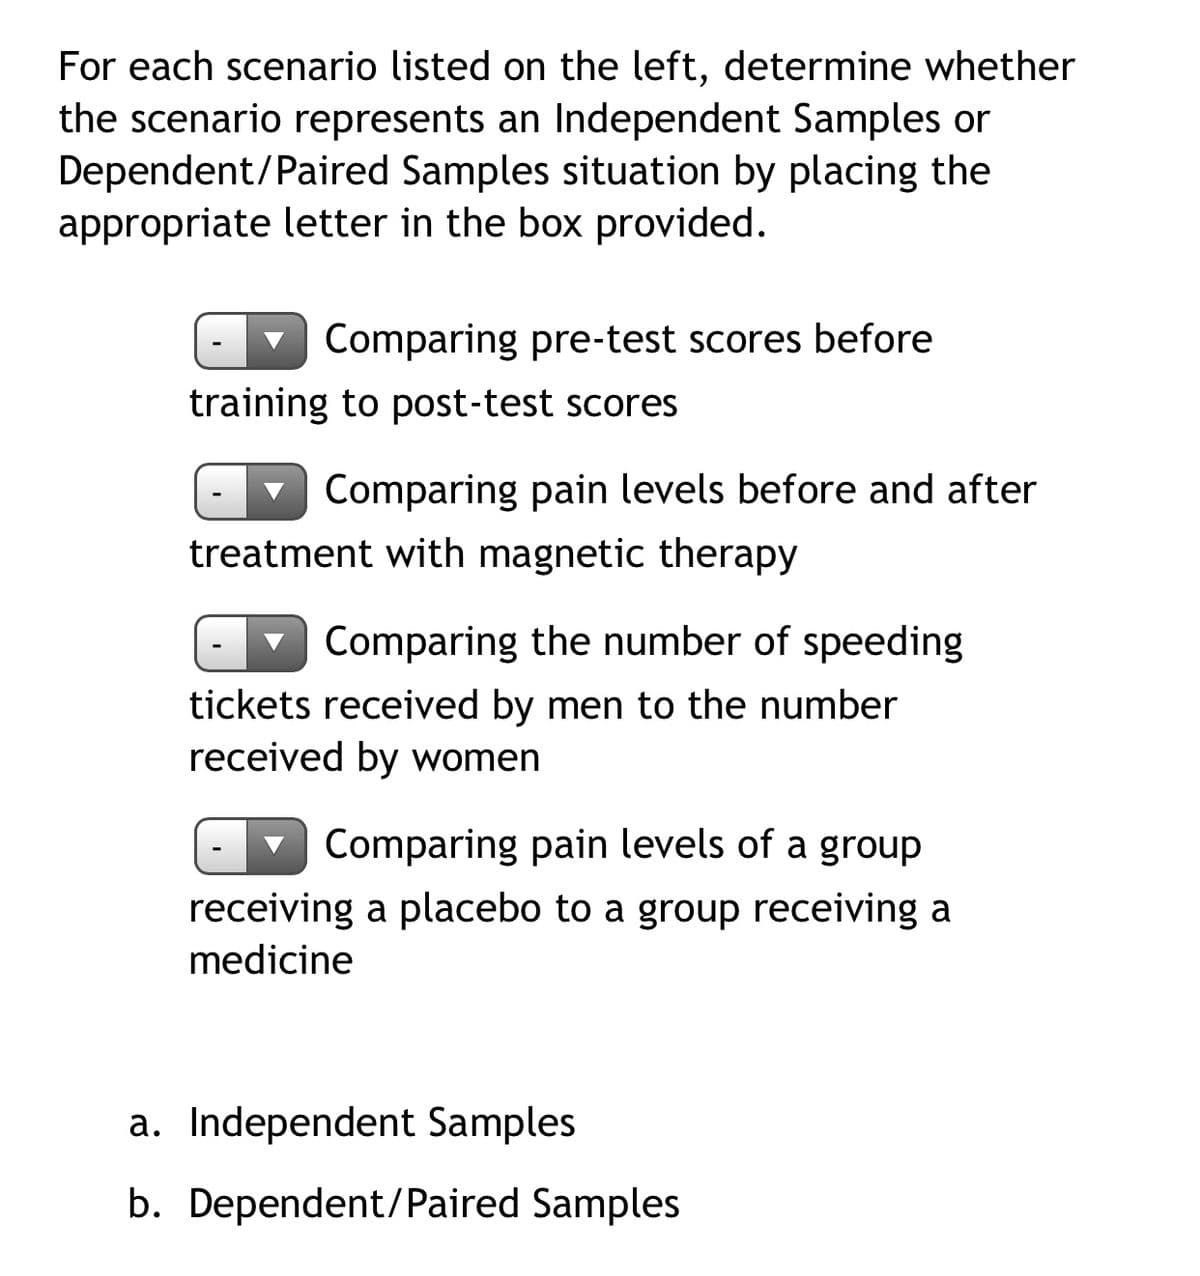 For each scenario listed on the left, determine whether
the scenario represents an Independent Samples or
Dependent/Paired Samples situation by placing the
appropriate letter in the box provided.
v Comparing pre-test scores before
training to post-test scores
v Comparing pain levels before and after
treatment with magnetic therapy
v Comparing the number of speeding
tickets received by men to the number
received by women
Comparing pain levels of a group
receiving a placebo to a group receiving a
medicine
a. Independent Samples
b. Dependent/Paired Samples
